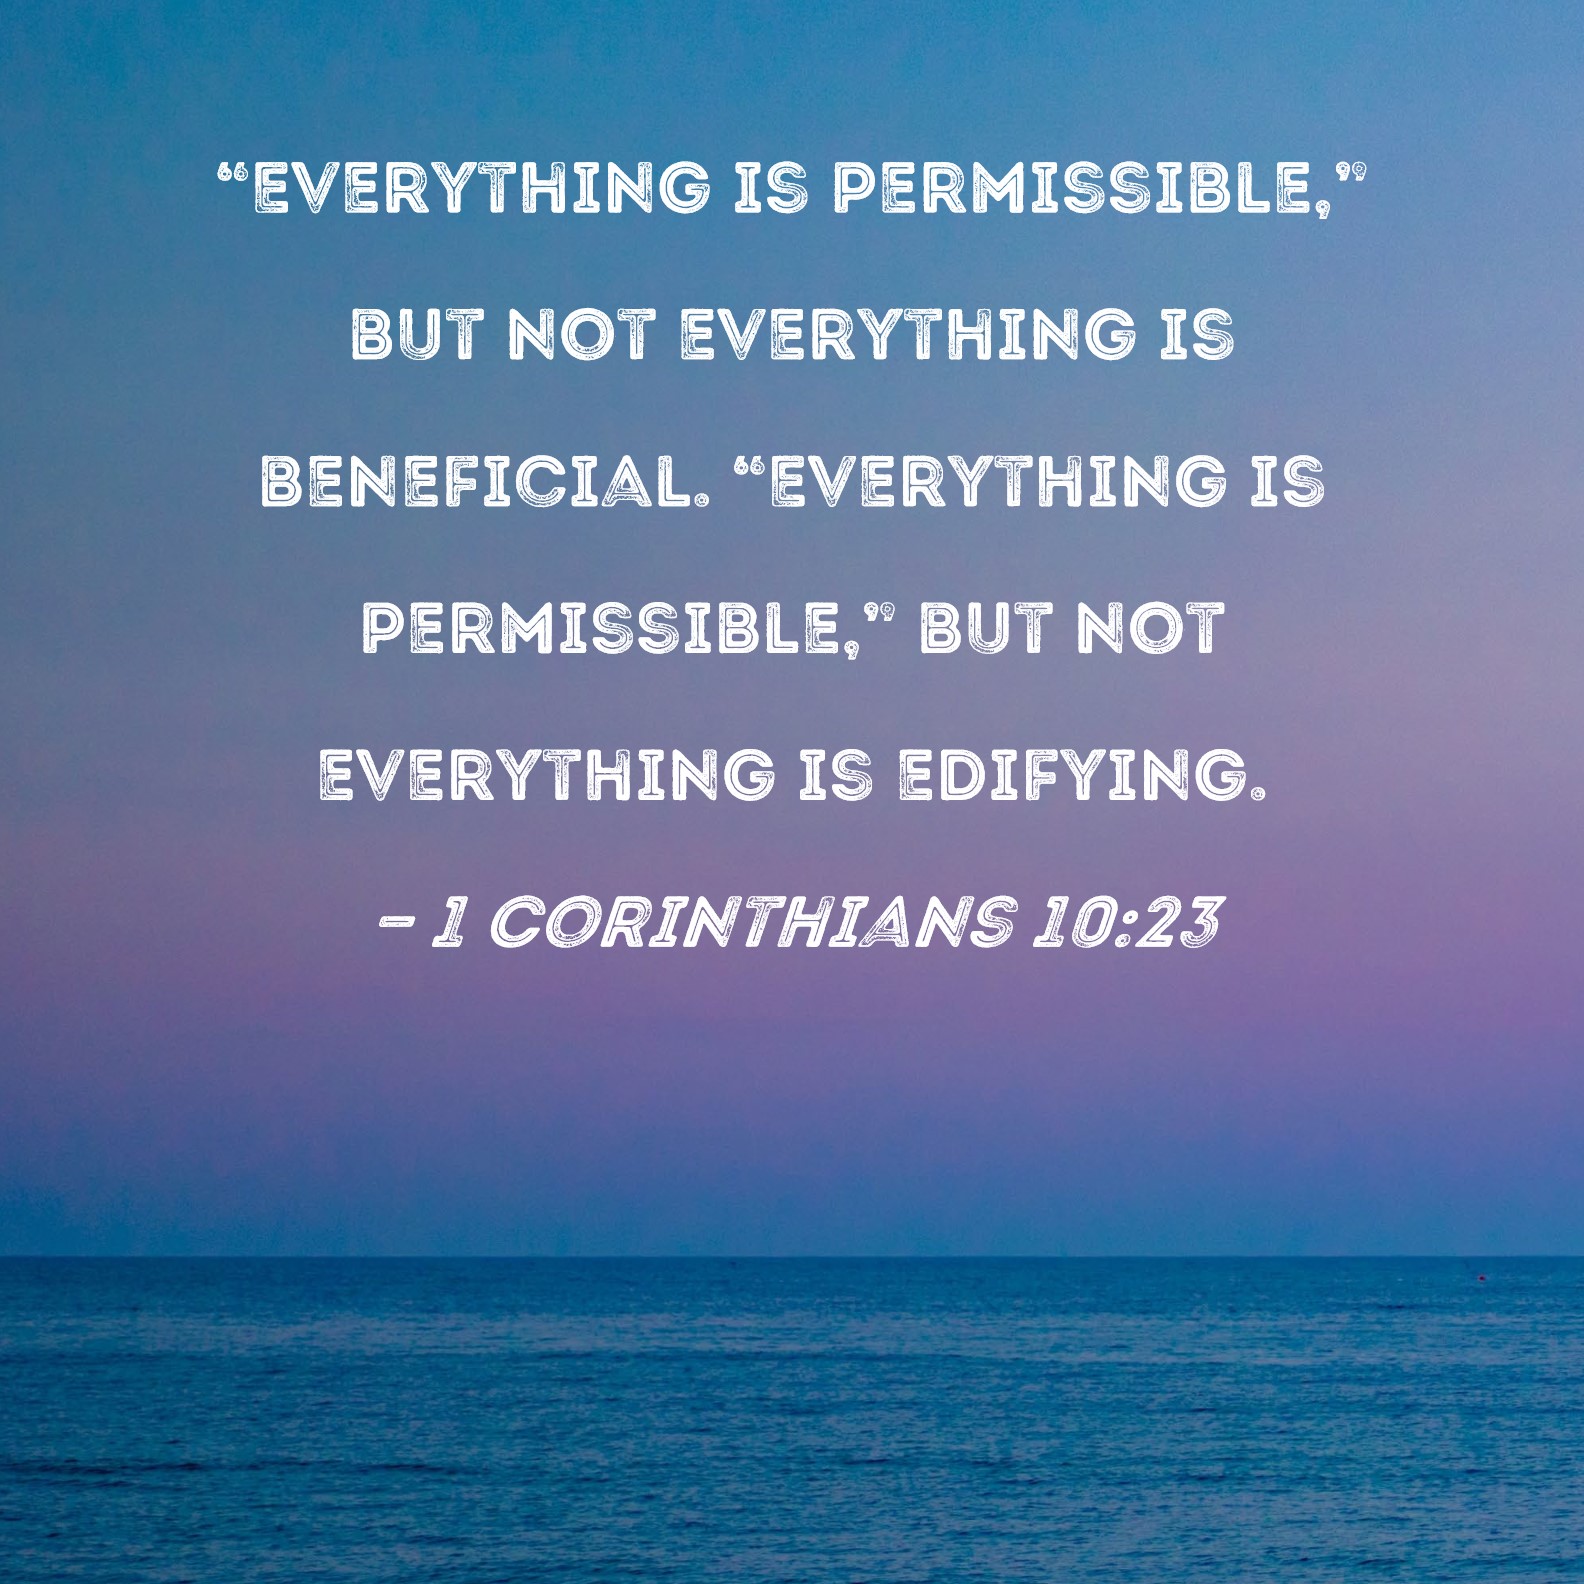 1-corinthians-10-23-everything-is-permissible-but-not-everything-is